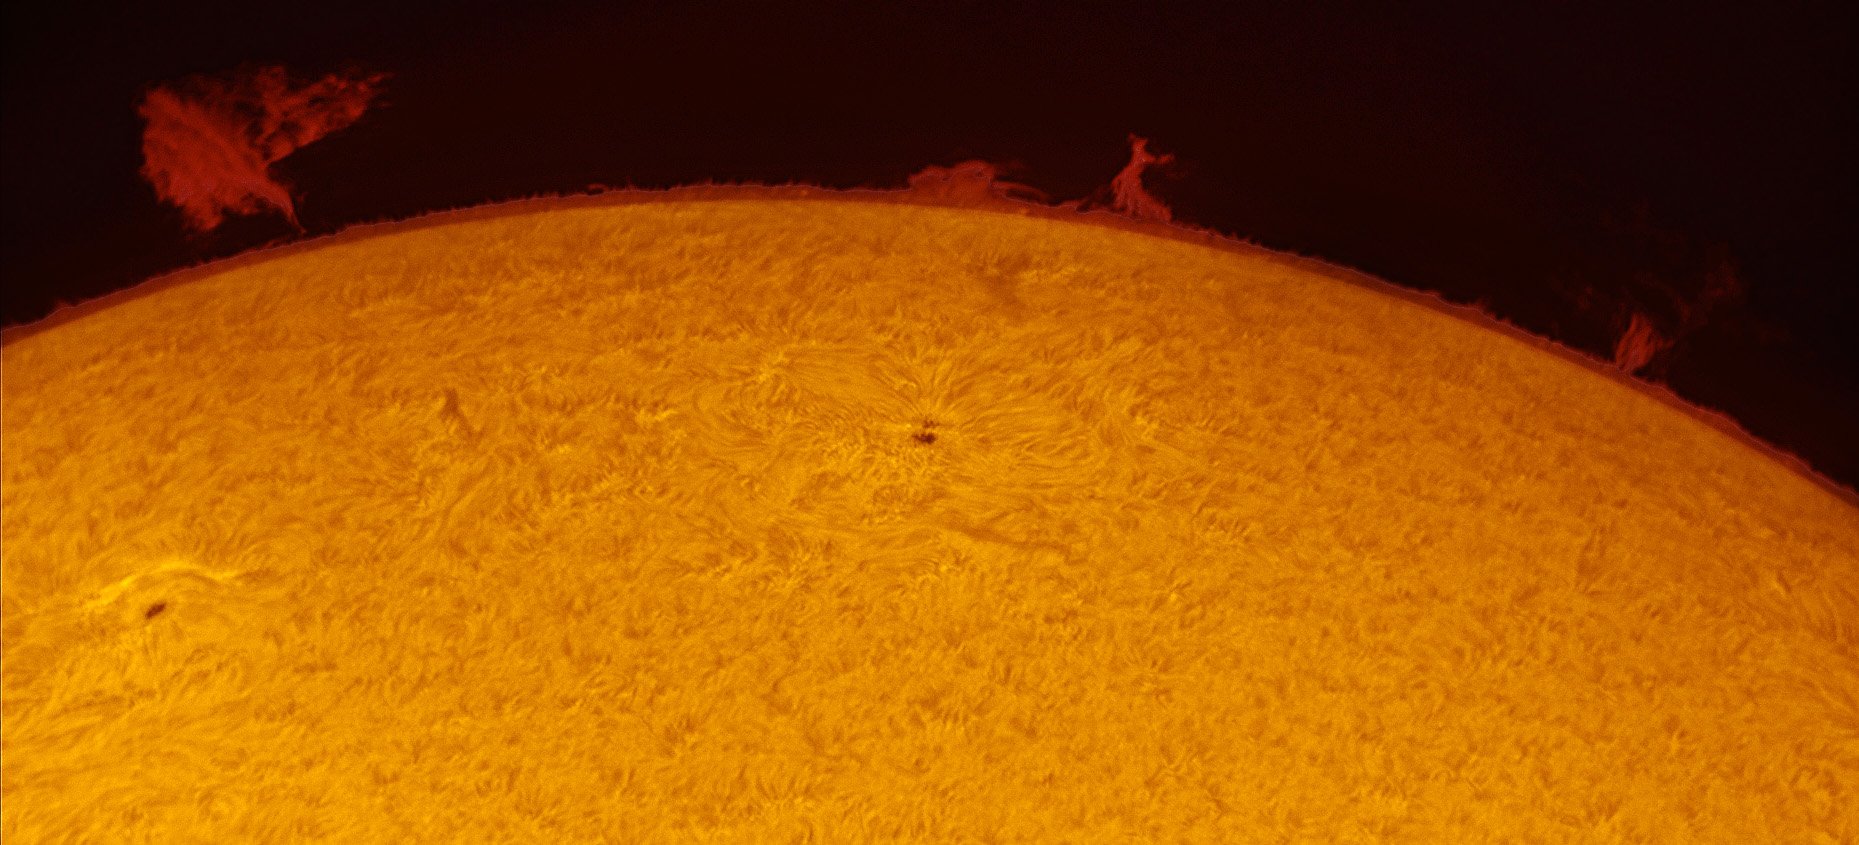 A prominence detaches from the Sun's surface on June 4, 2022.